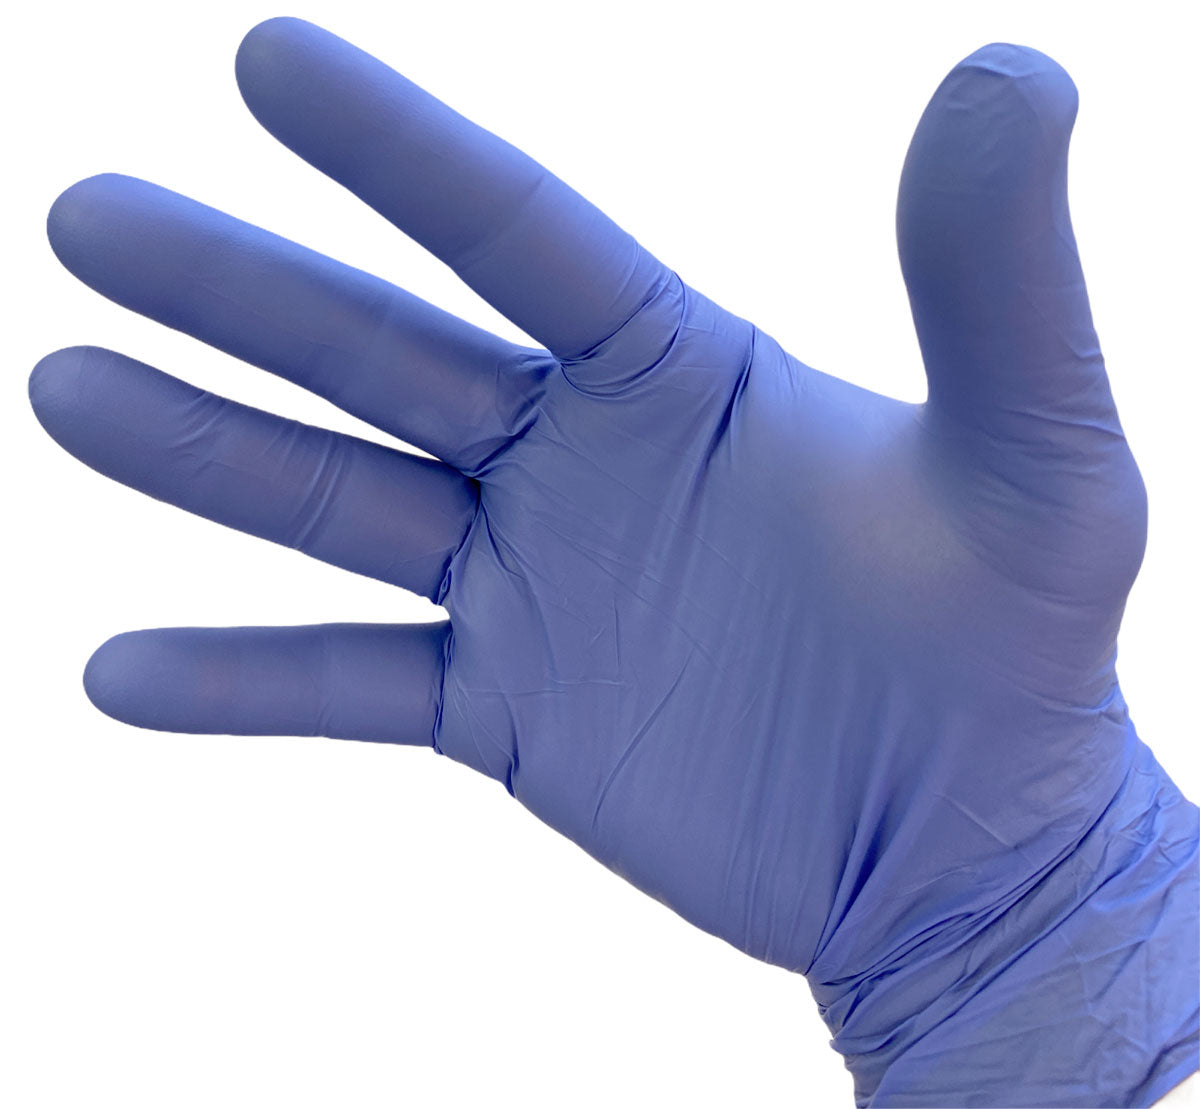 NiTouch Blue Nitrile Exam Gloves on hand